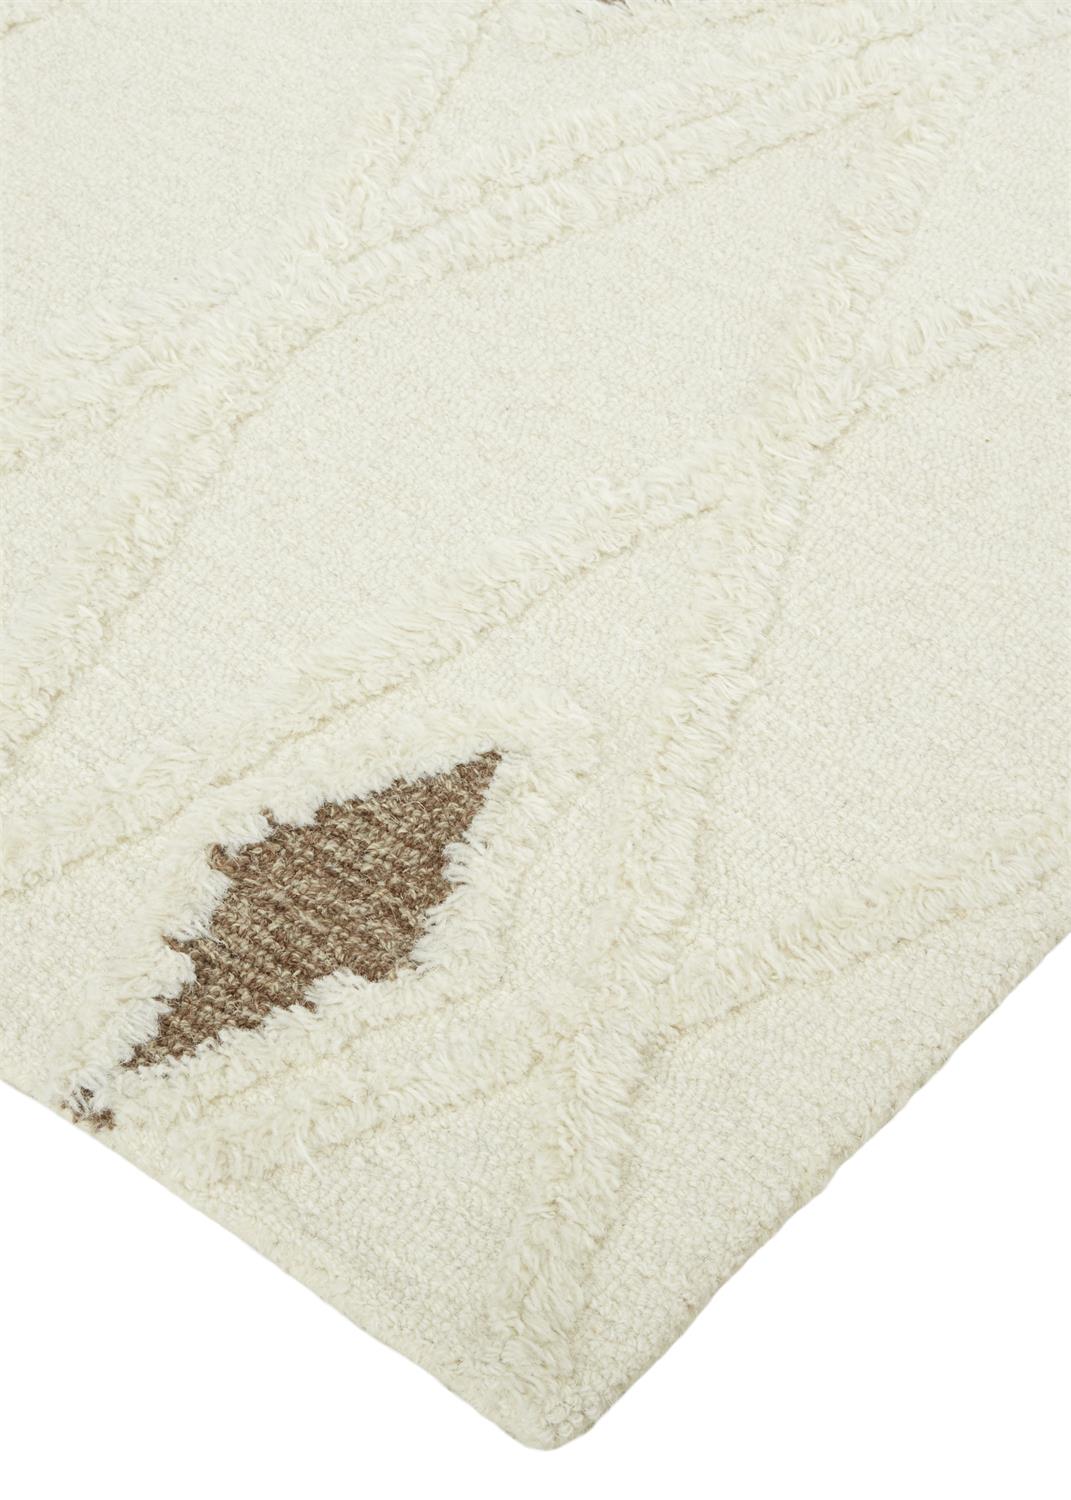 Anica 8008F Hand Tufted Wool Indoor Area Rug by Feizy Rugs